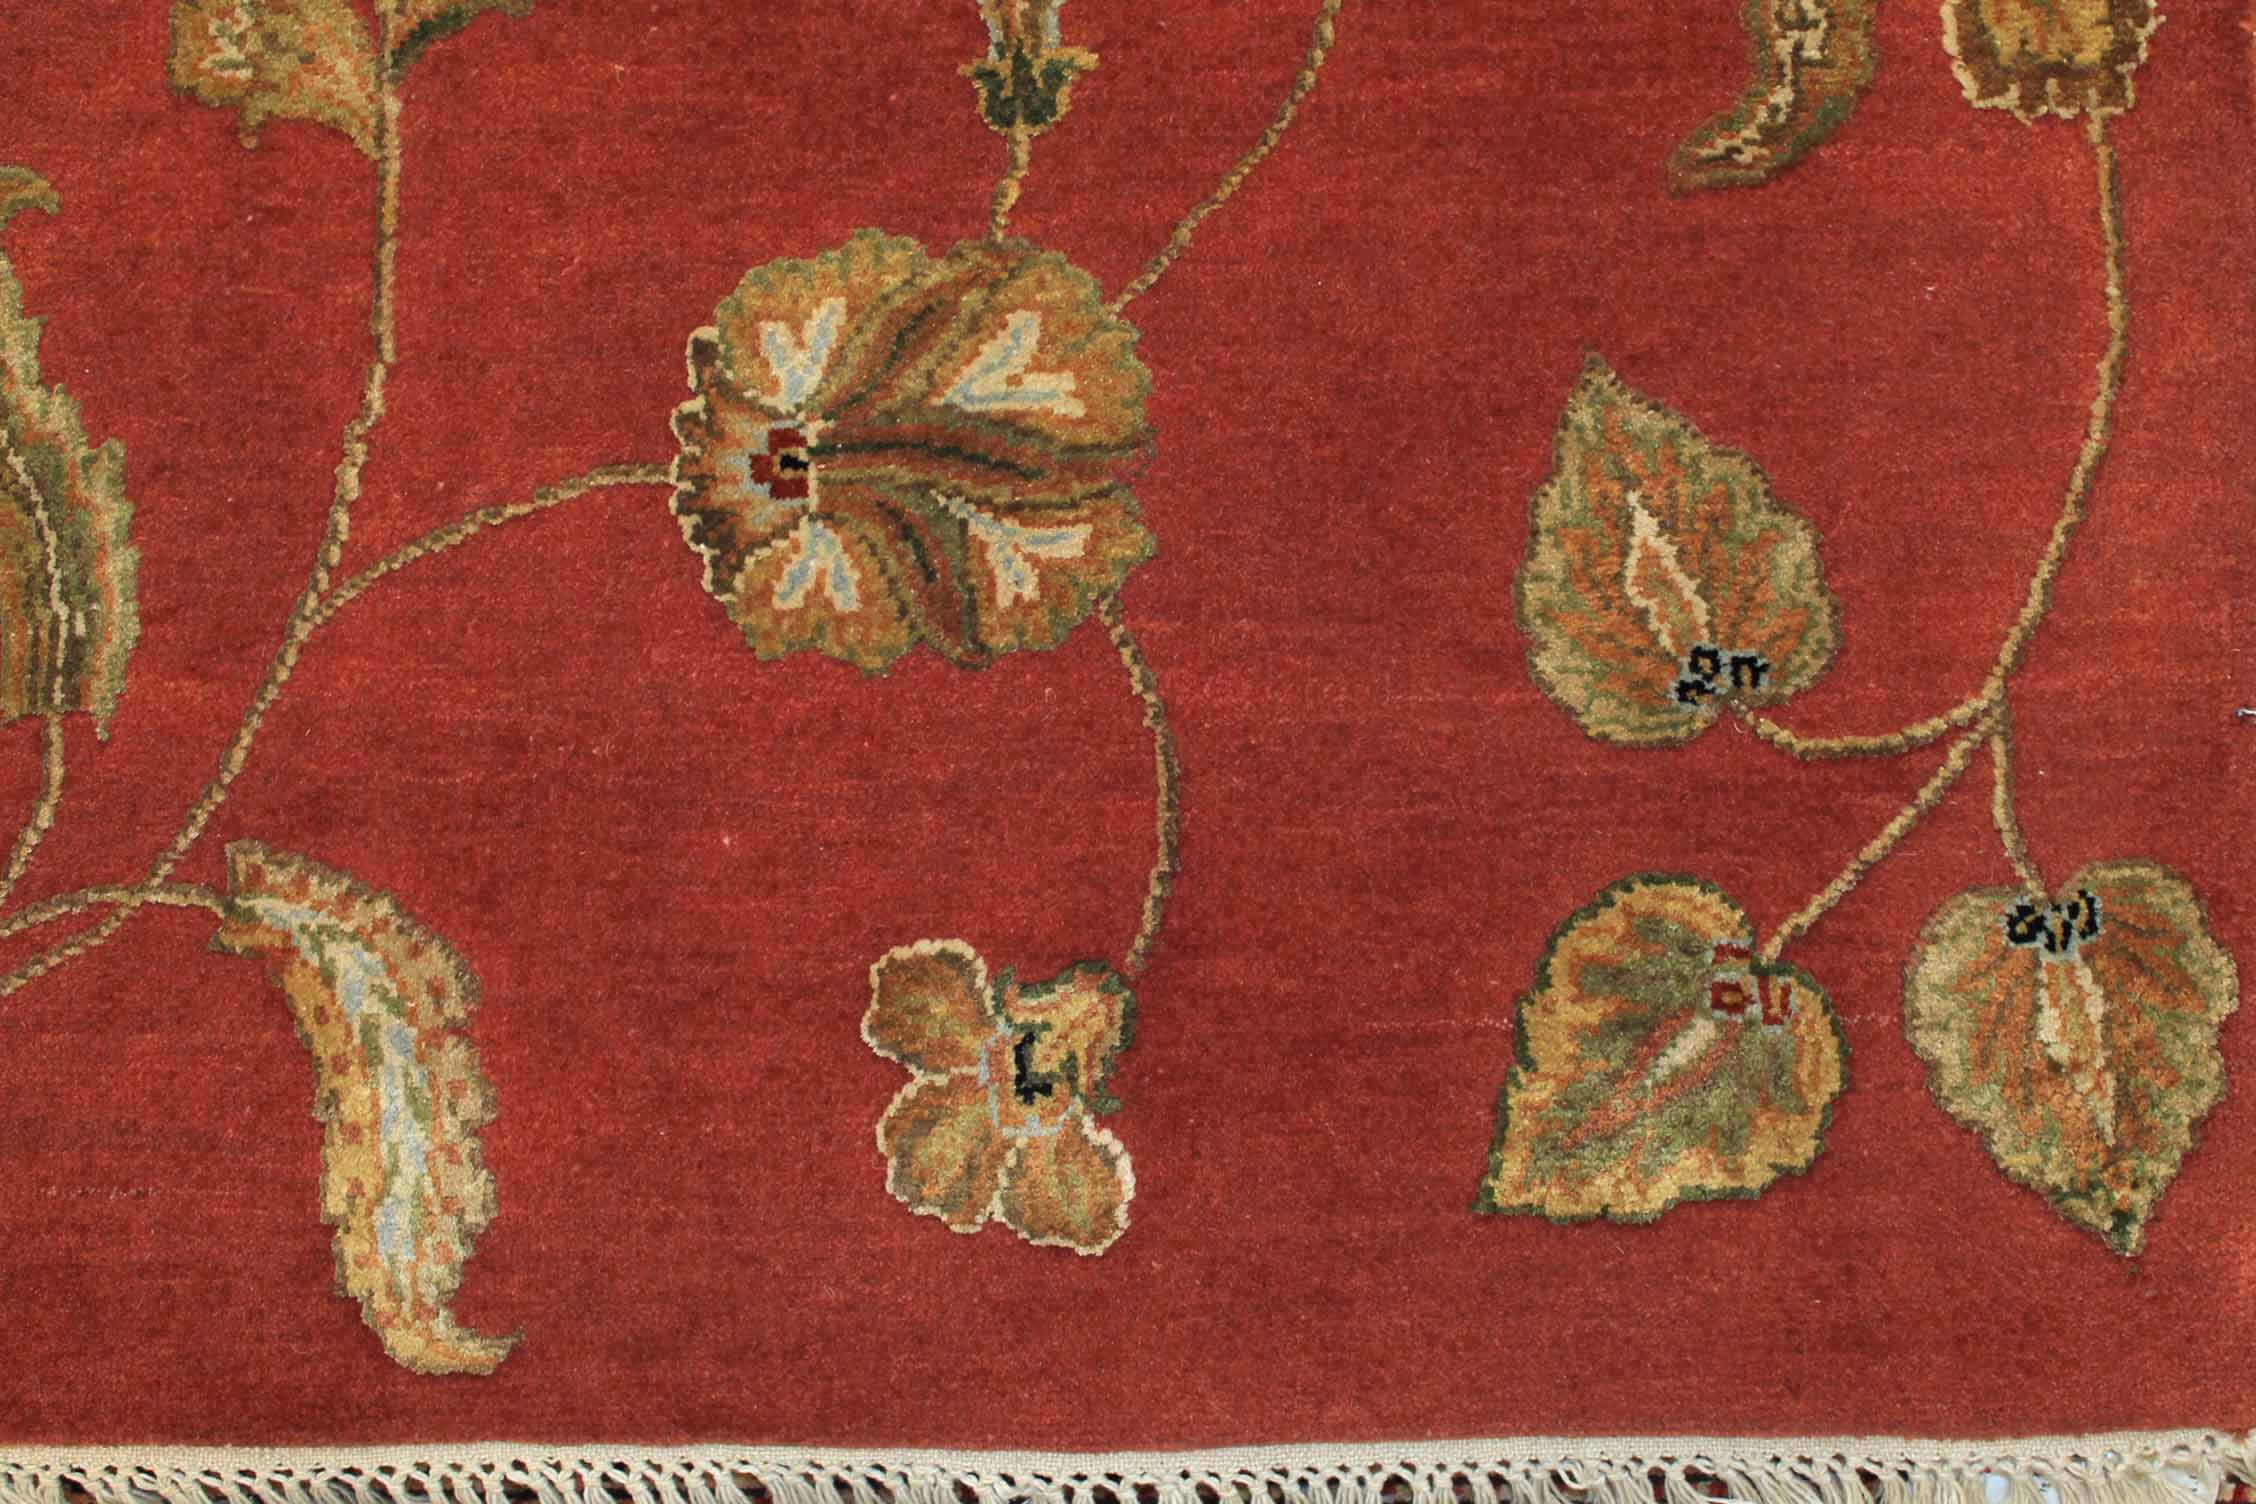 6x9 Silk Flower Hand Knotted Wool Area Rug - MR10865